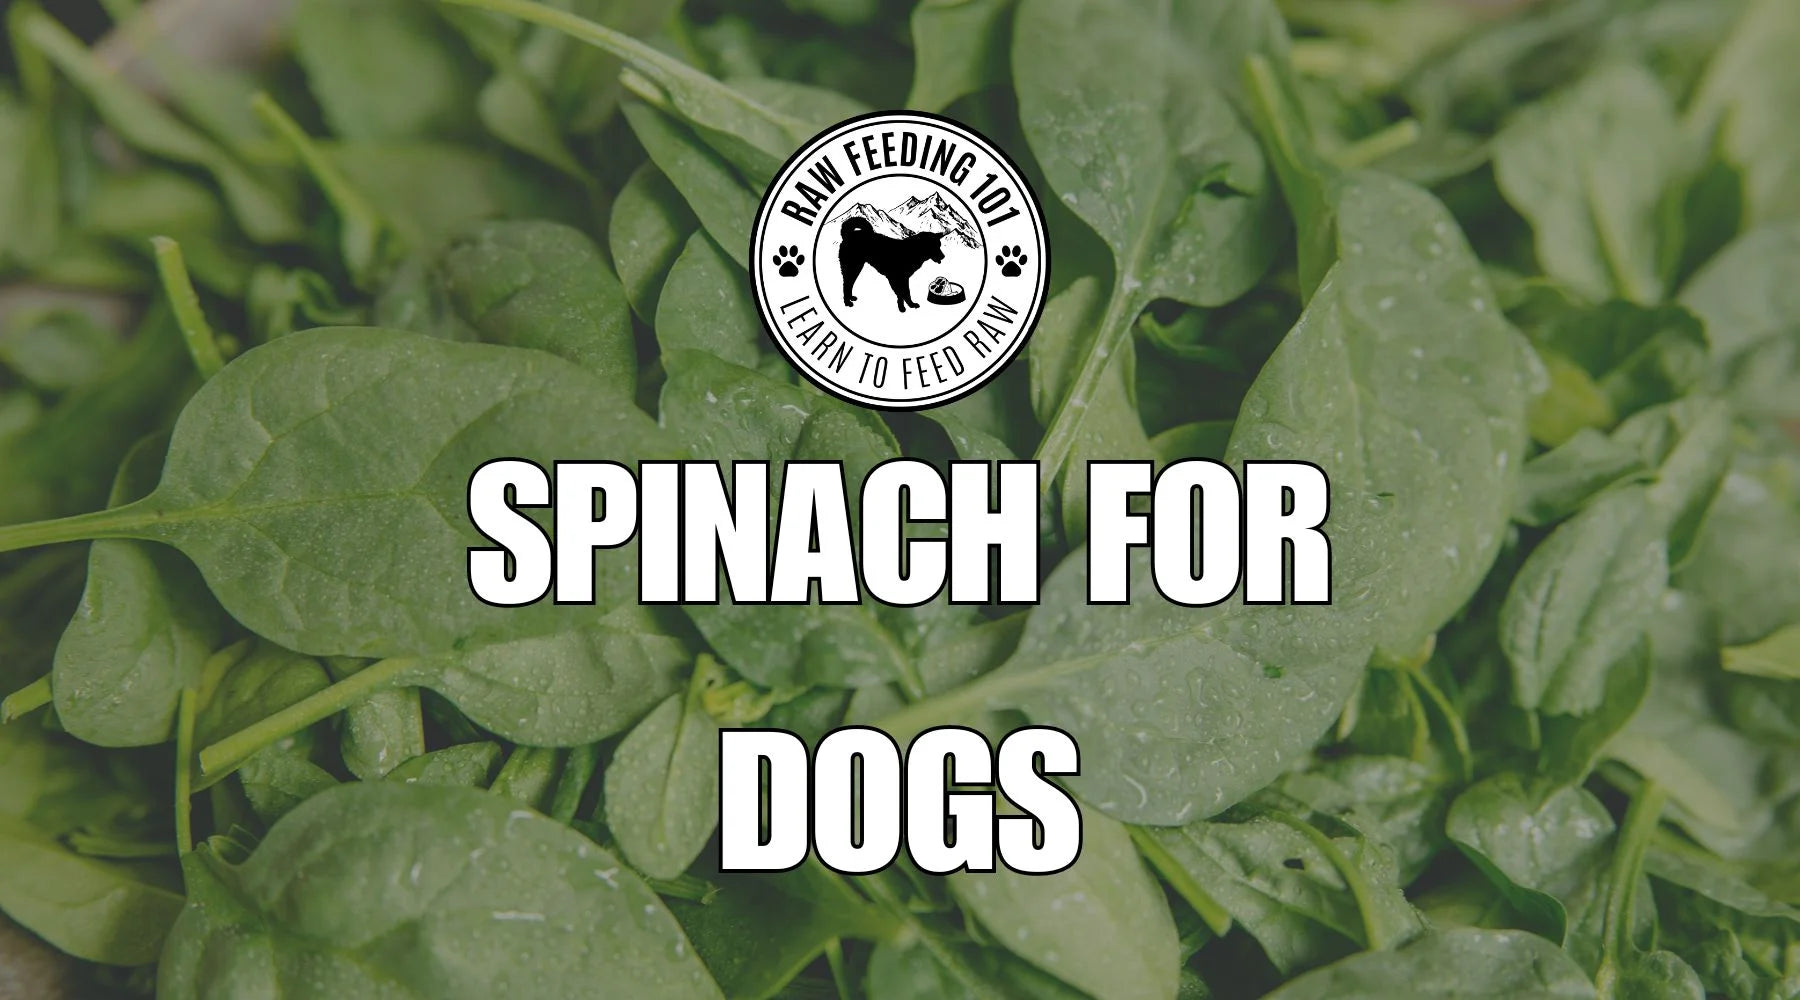 Spinach for Dogs: Superfood or Safety Concern?